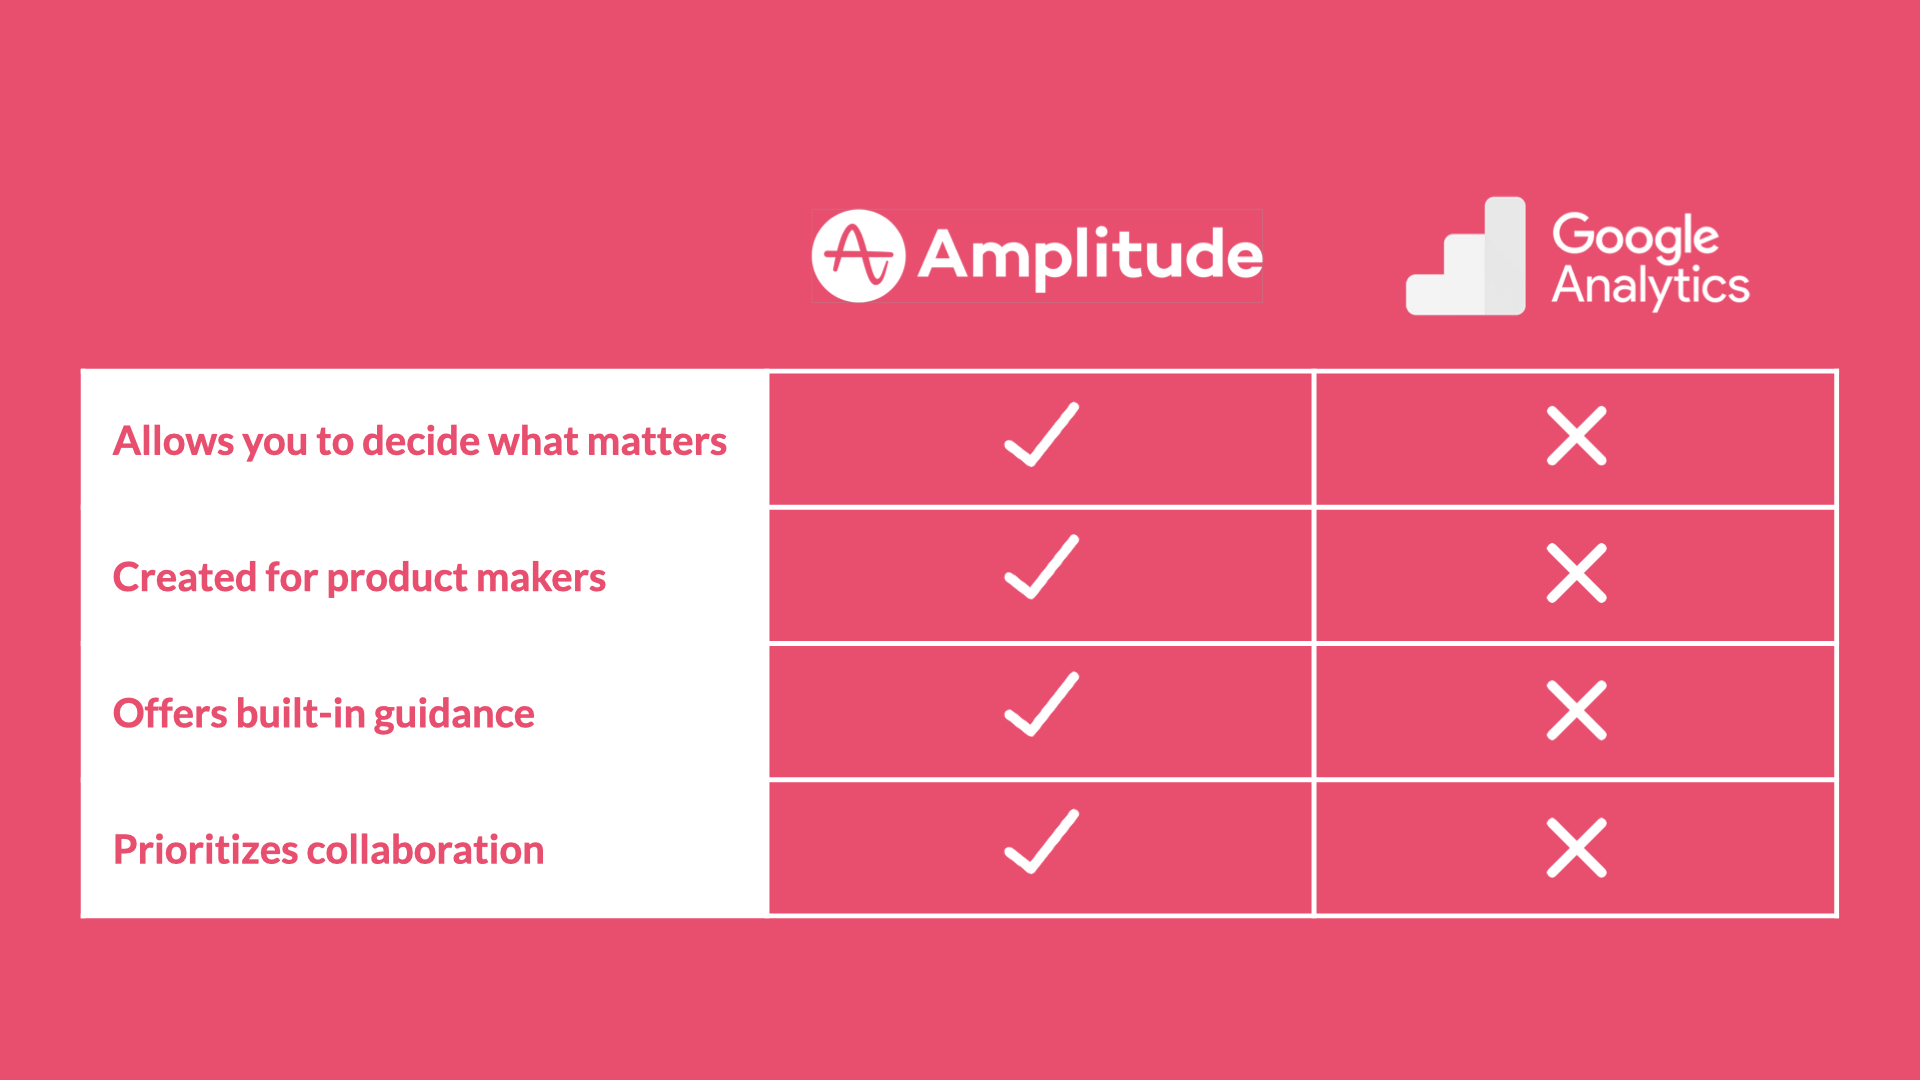 How Is Amplitude Different From Google Analytics